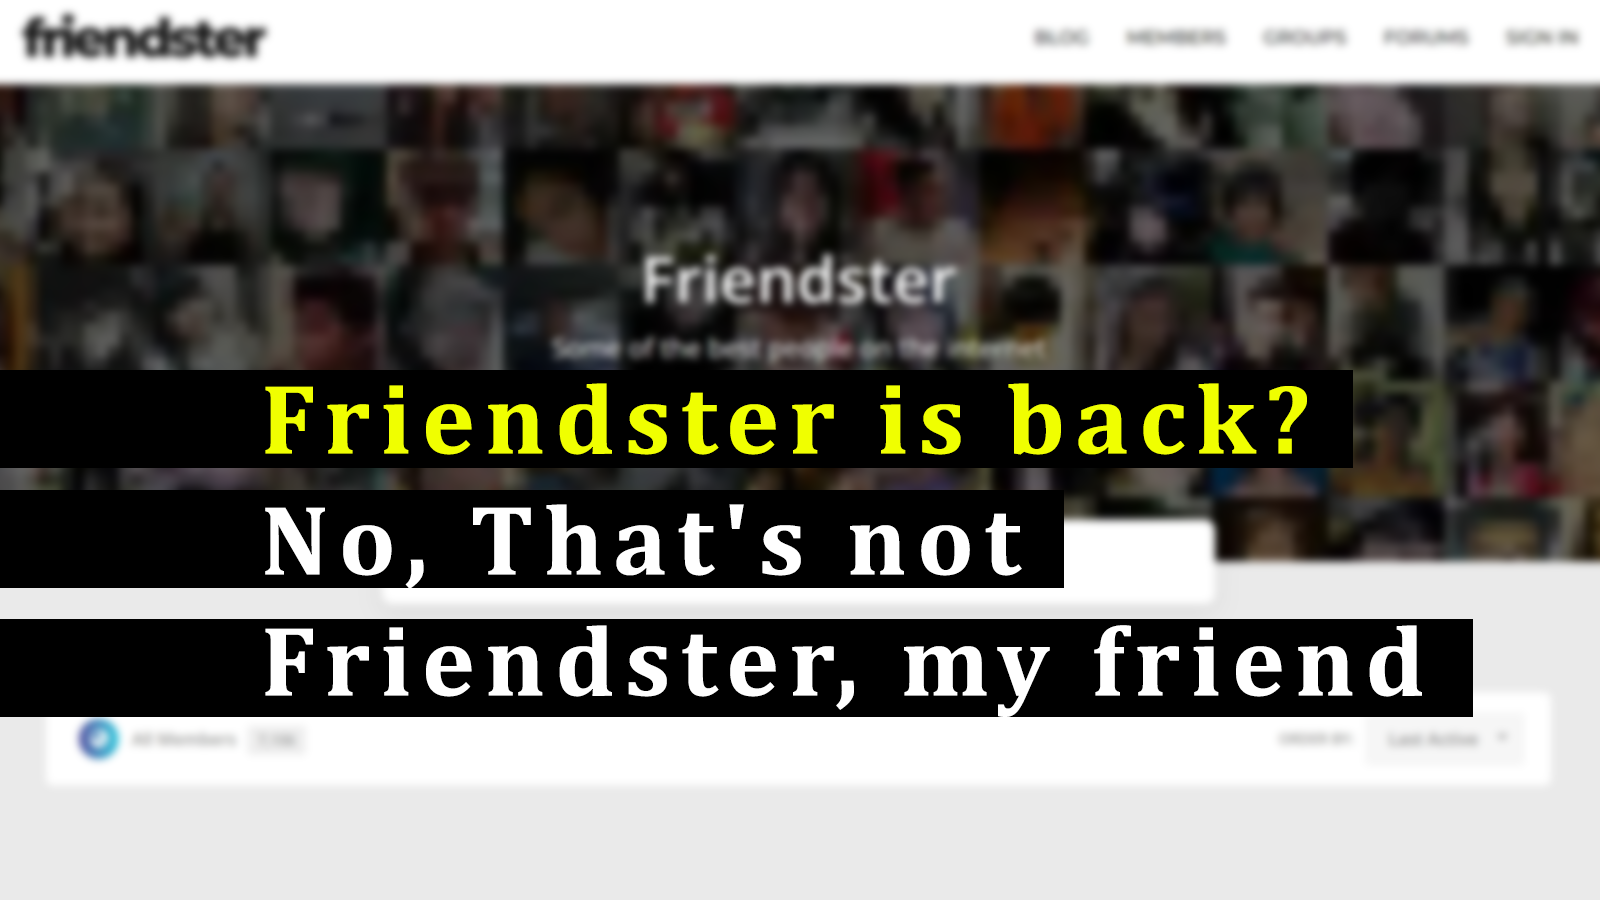 Friendster is back? No, That's not Friendster, my friend